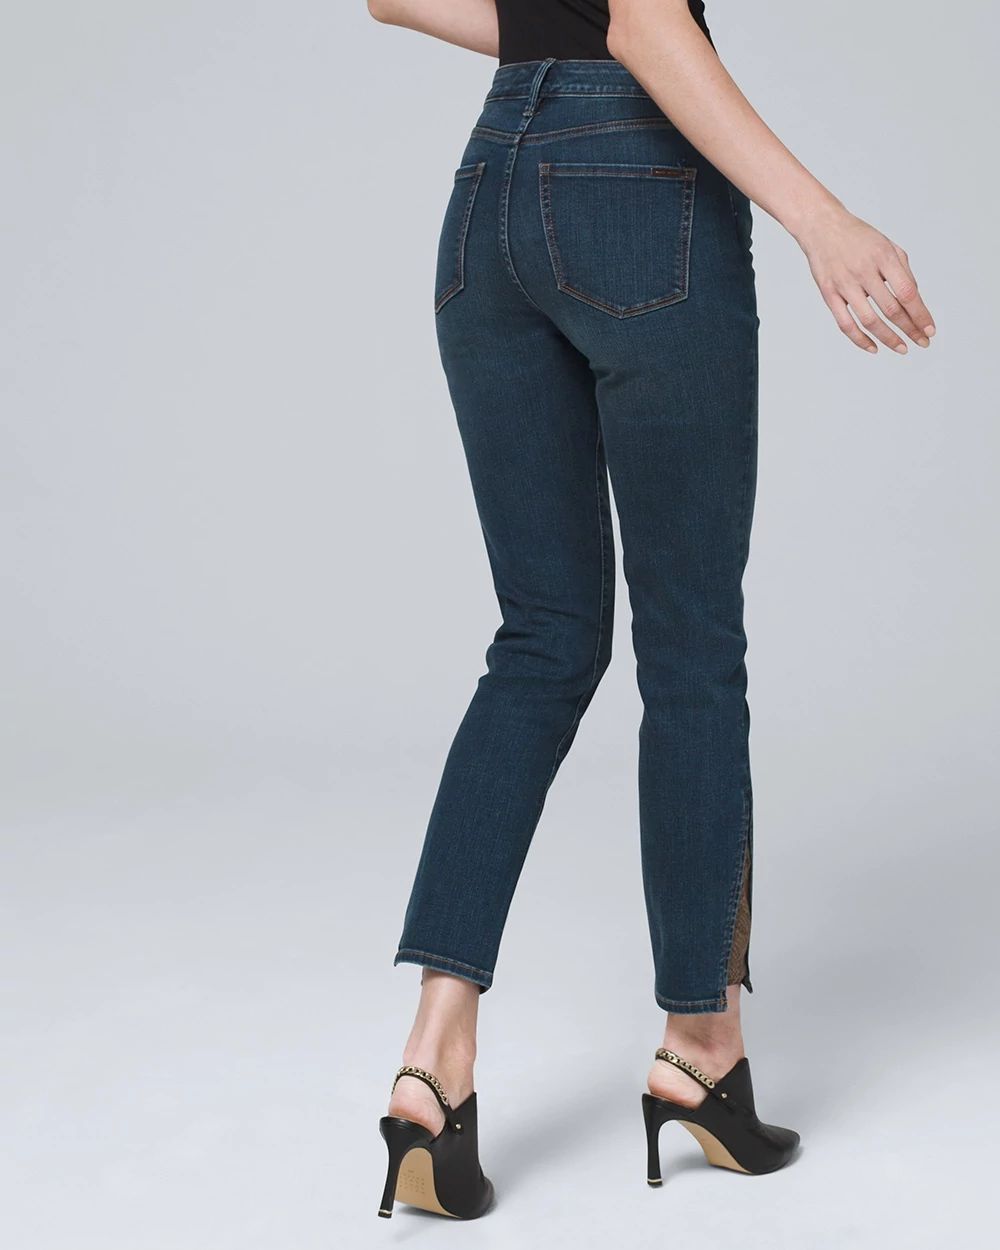 High-Rise Snake-Gusset Crop Jeans click to view larger image.